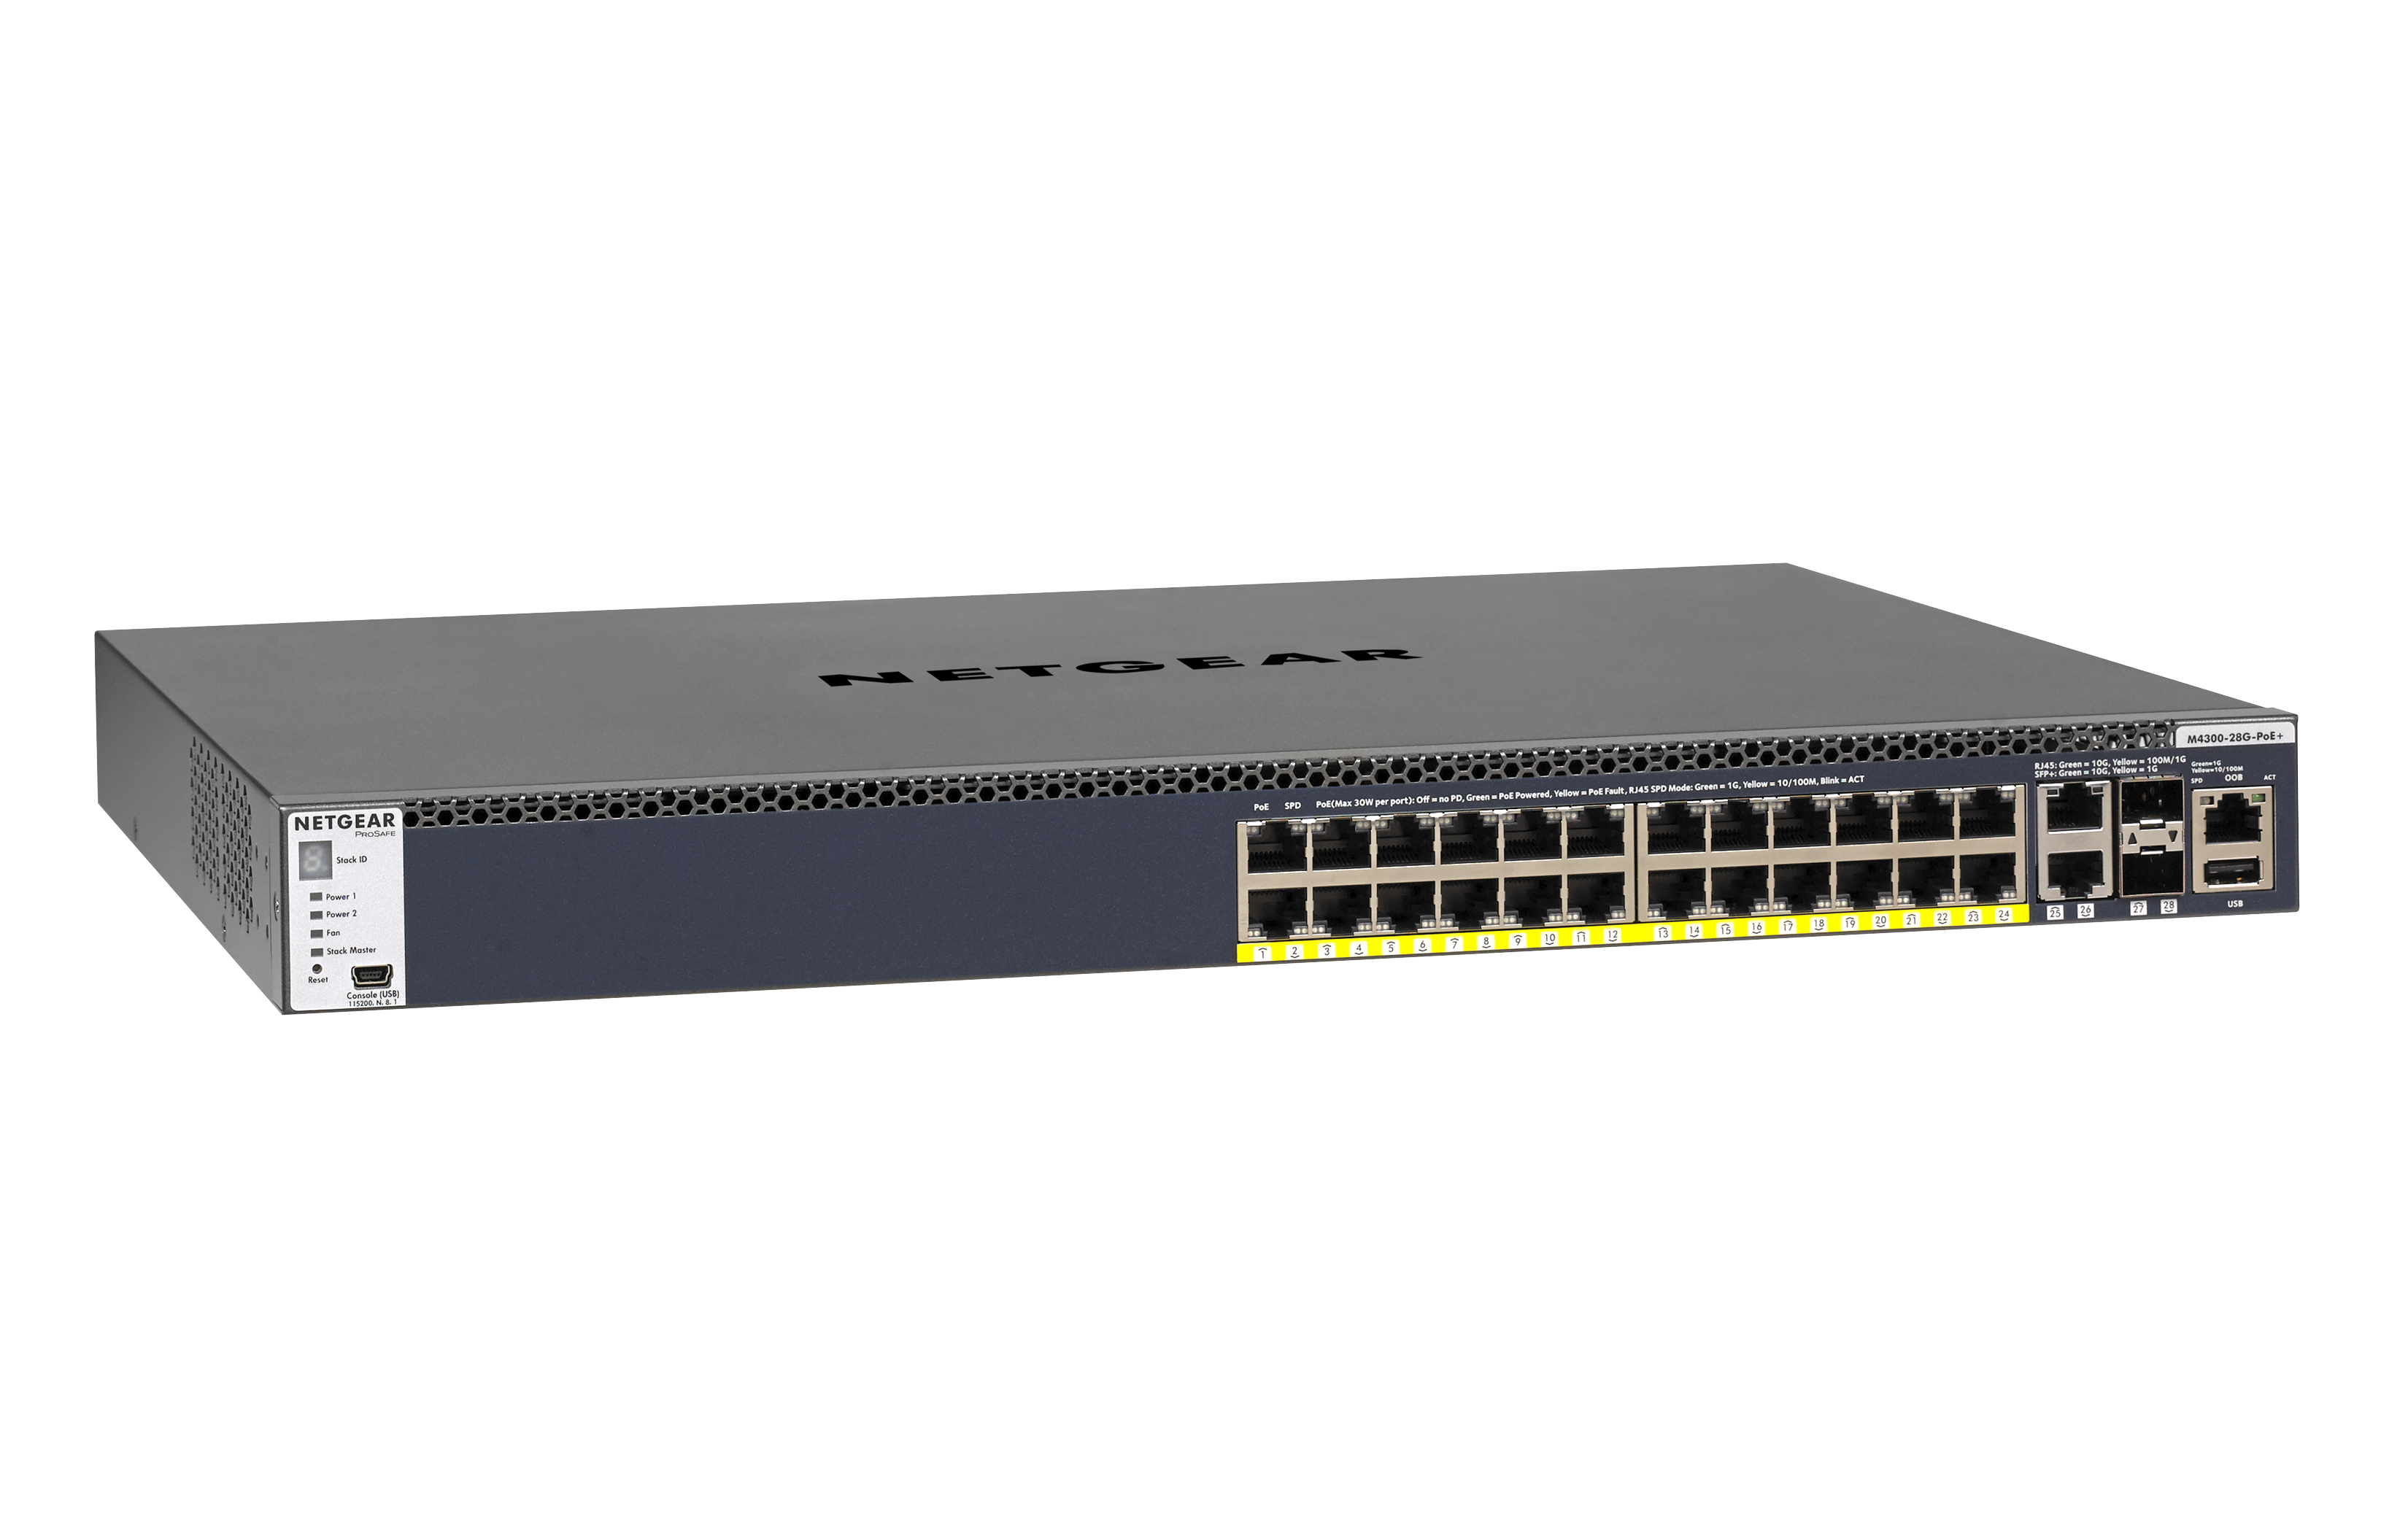 NETGEAR M4300-28G-PoE+ (550W PSU) Stackable Managed Switch (GSM4328PA) (Networking Equipment Switches Gigabit Switches) photo